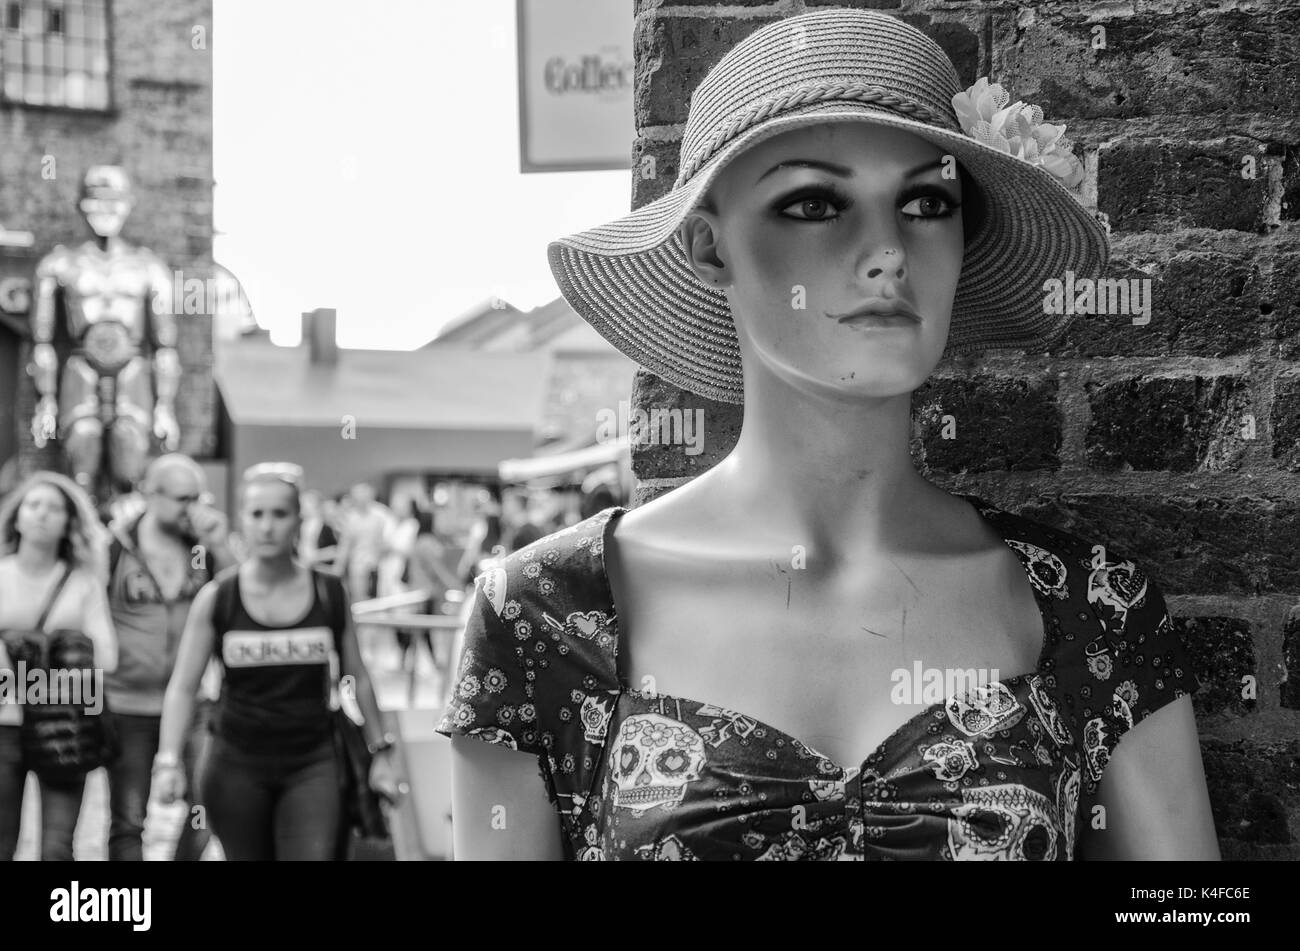 A shop mannequin stands in-front of a brick wall. People in the background are out of focus. Stock Photo